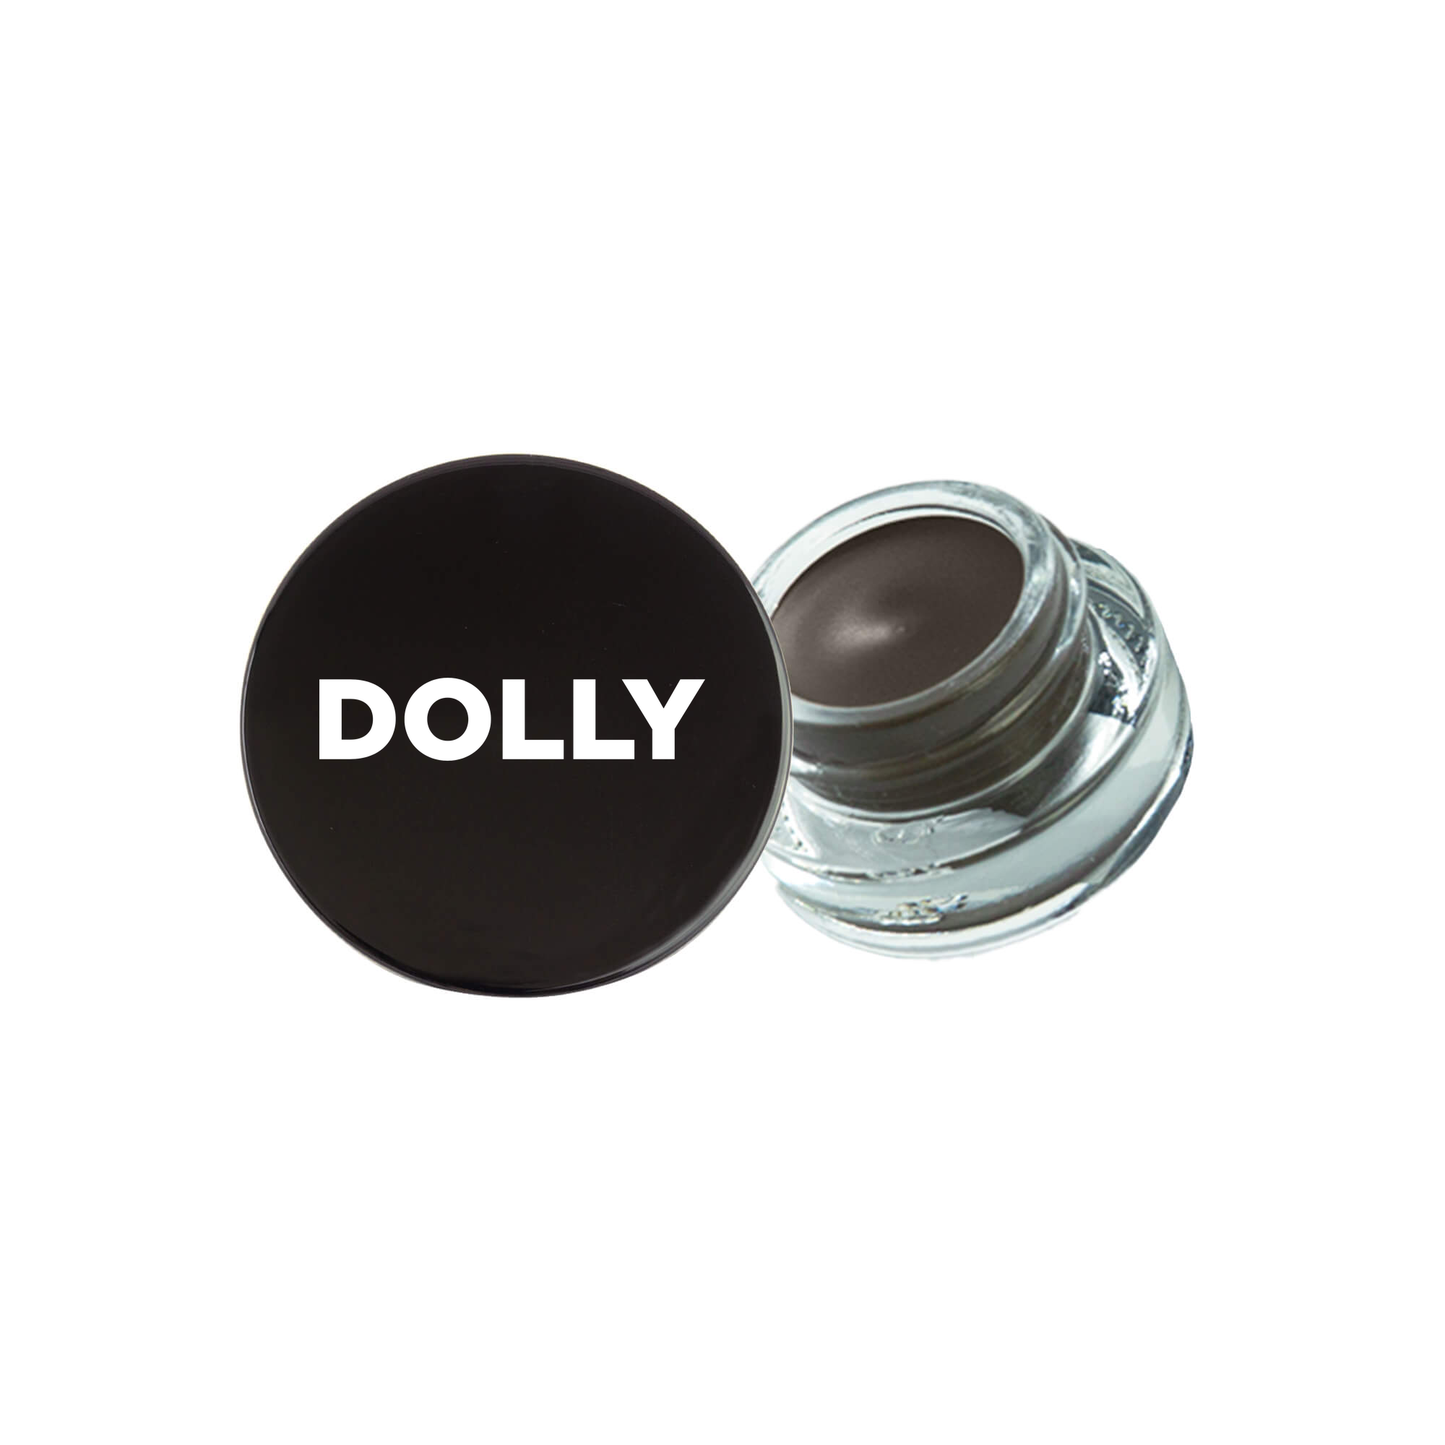 DOLLY Brow Pomade - Truffle